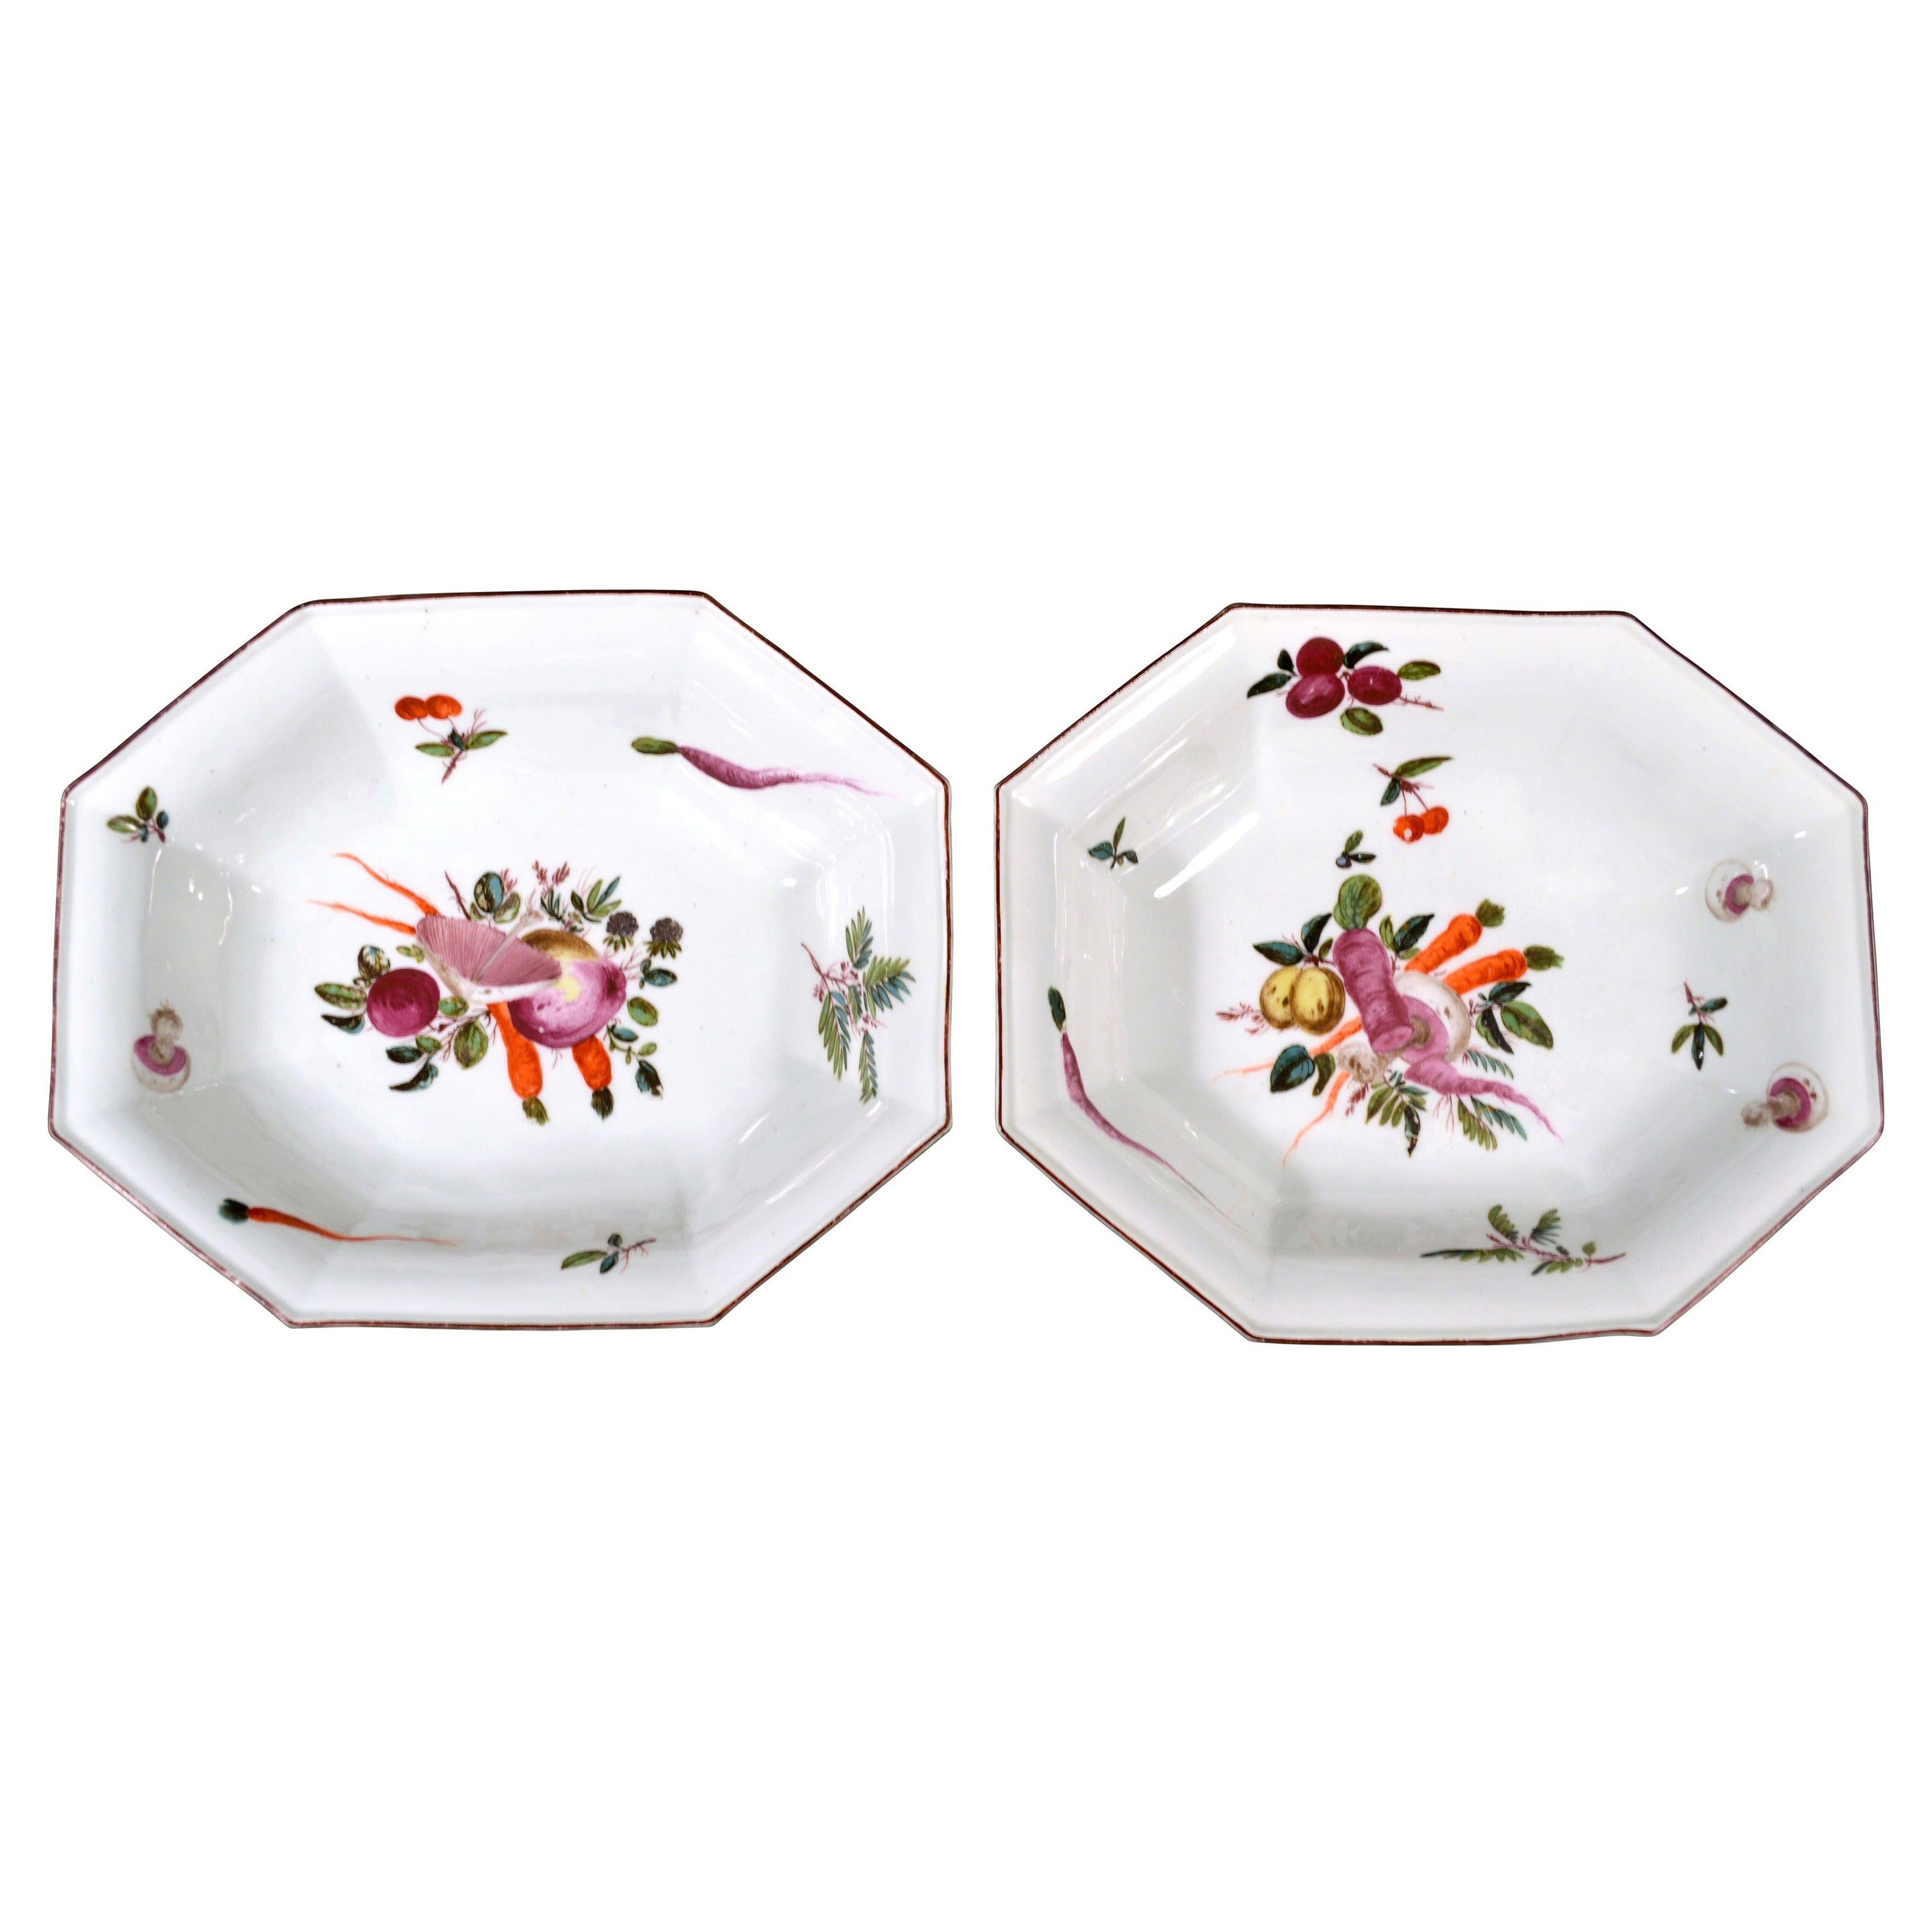 18th-century Chelsea Porcelain Dishes Painted with Vegetables